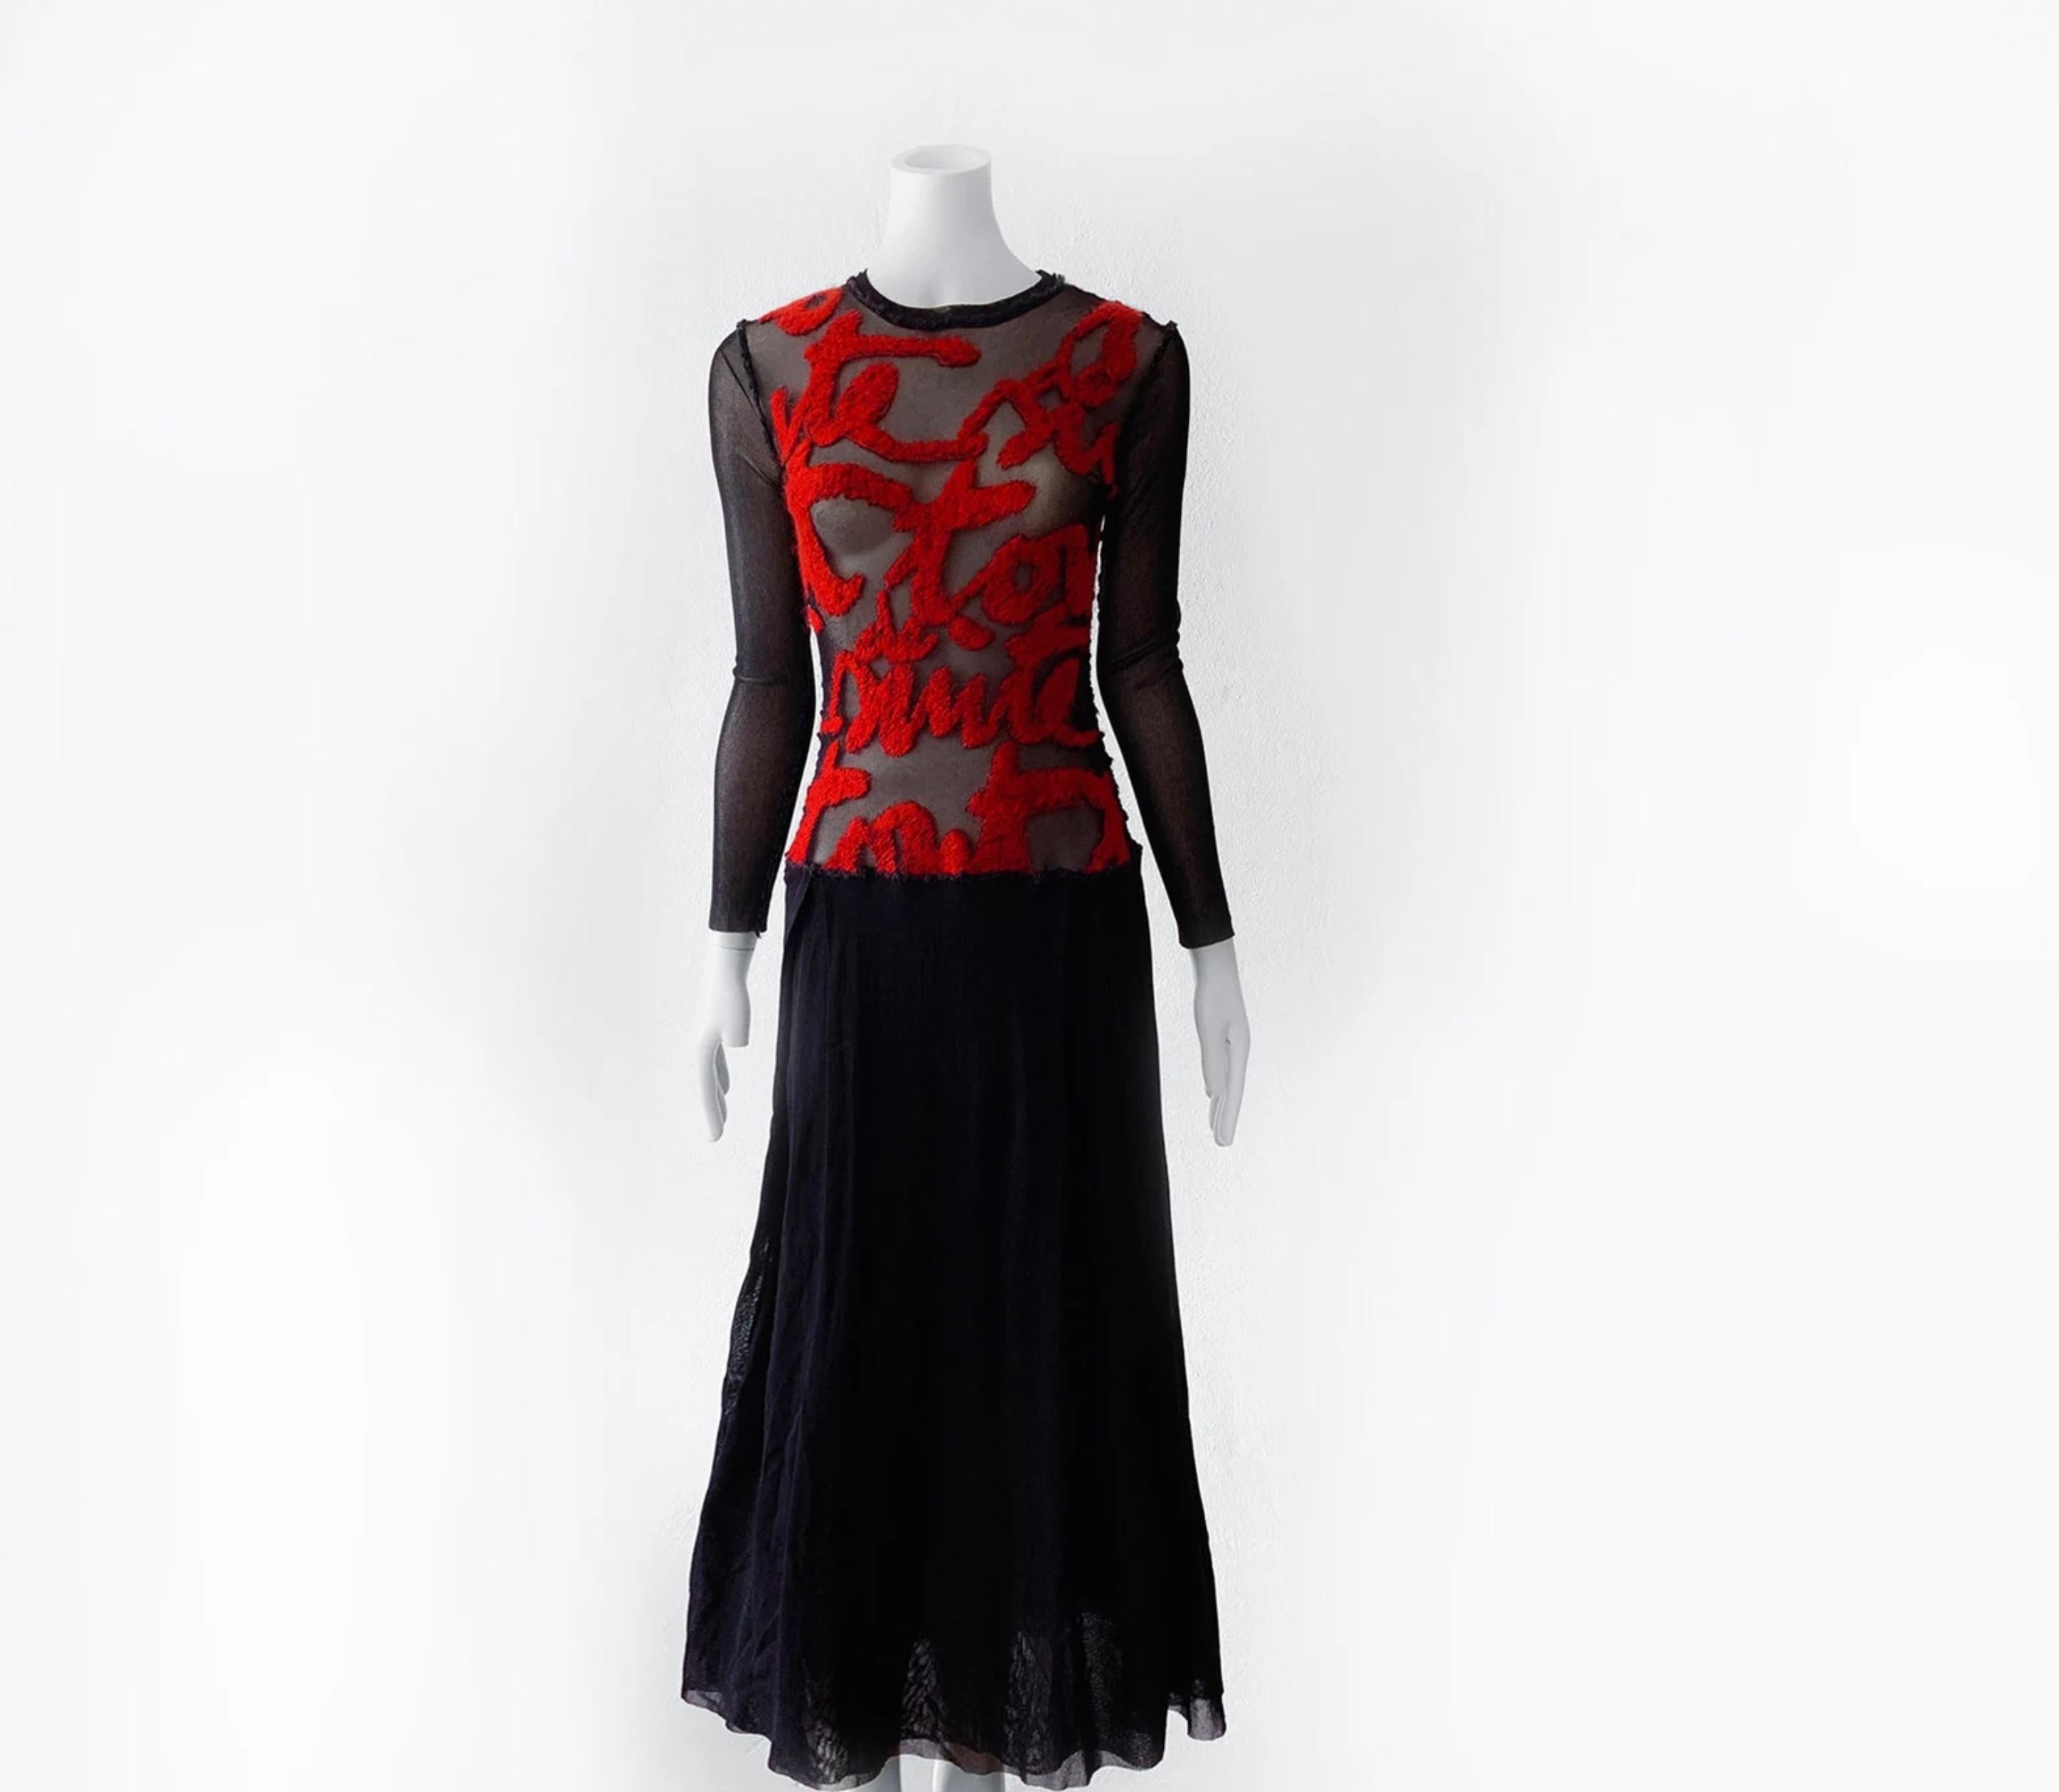 
Stunning Iconic Jean Paul Gaultier Dress. Black semi sheer mesh dress with long sleeves and double layered skirtpart.
Deep red French writing on the front. This is typical iconic late 90s Gaultier, it also could be from the 2001 collectiion where